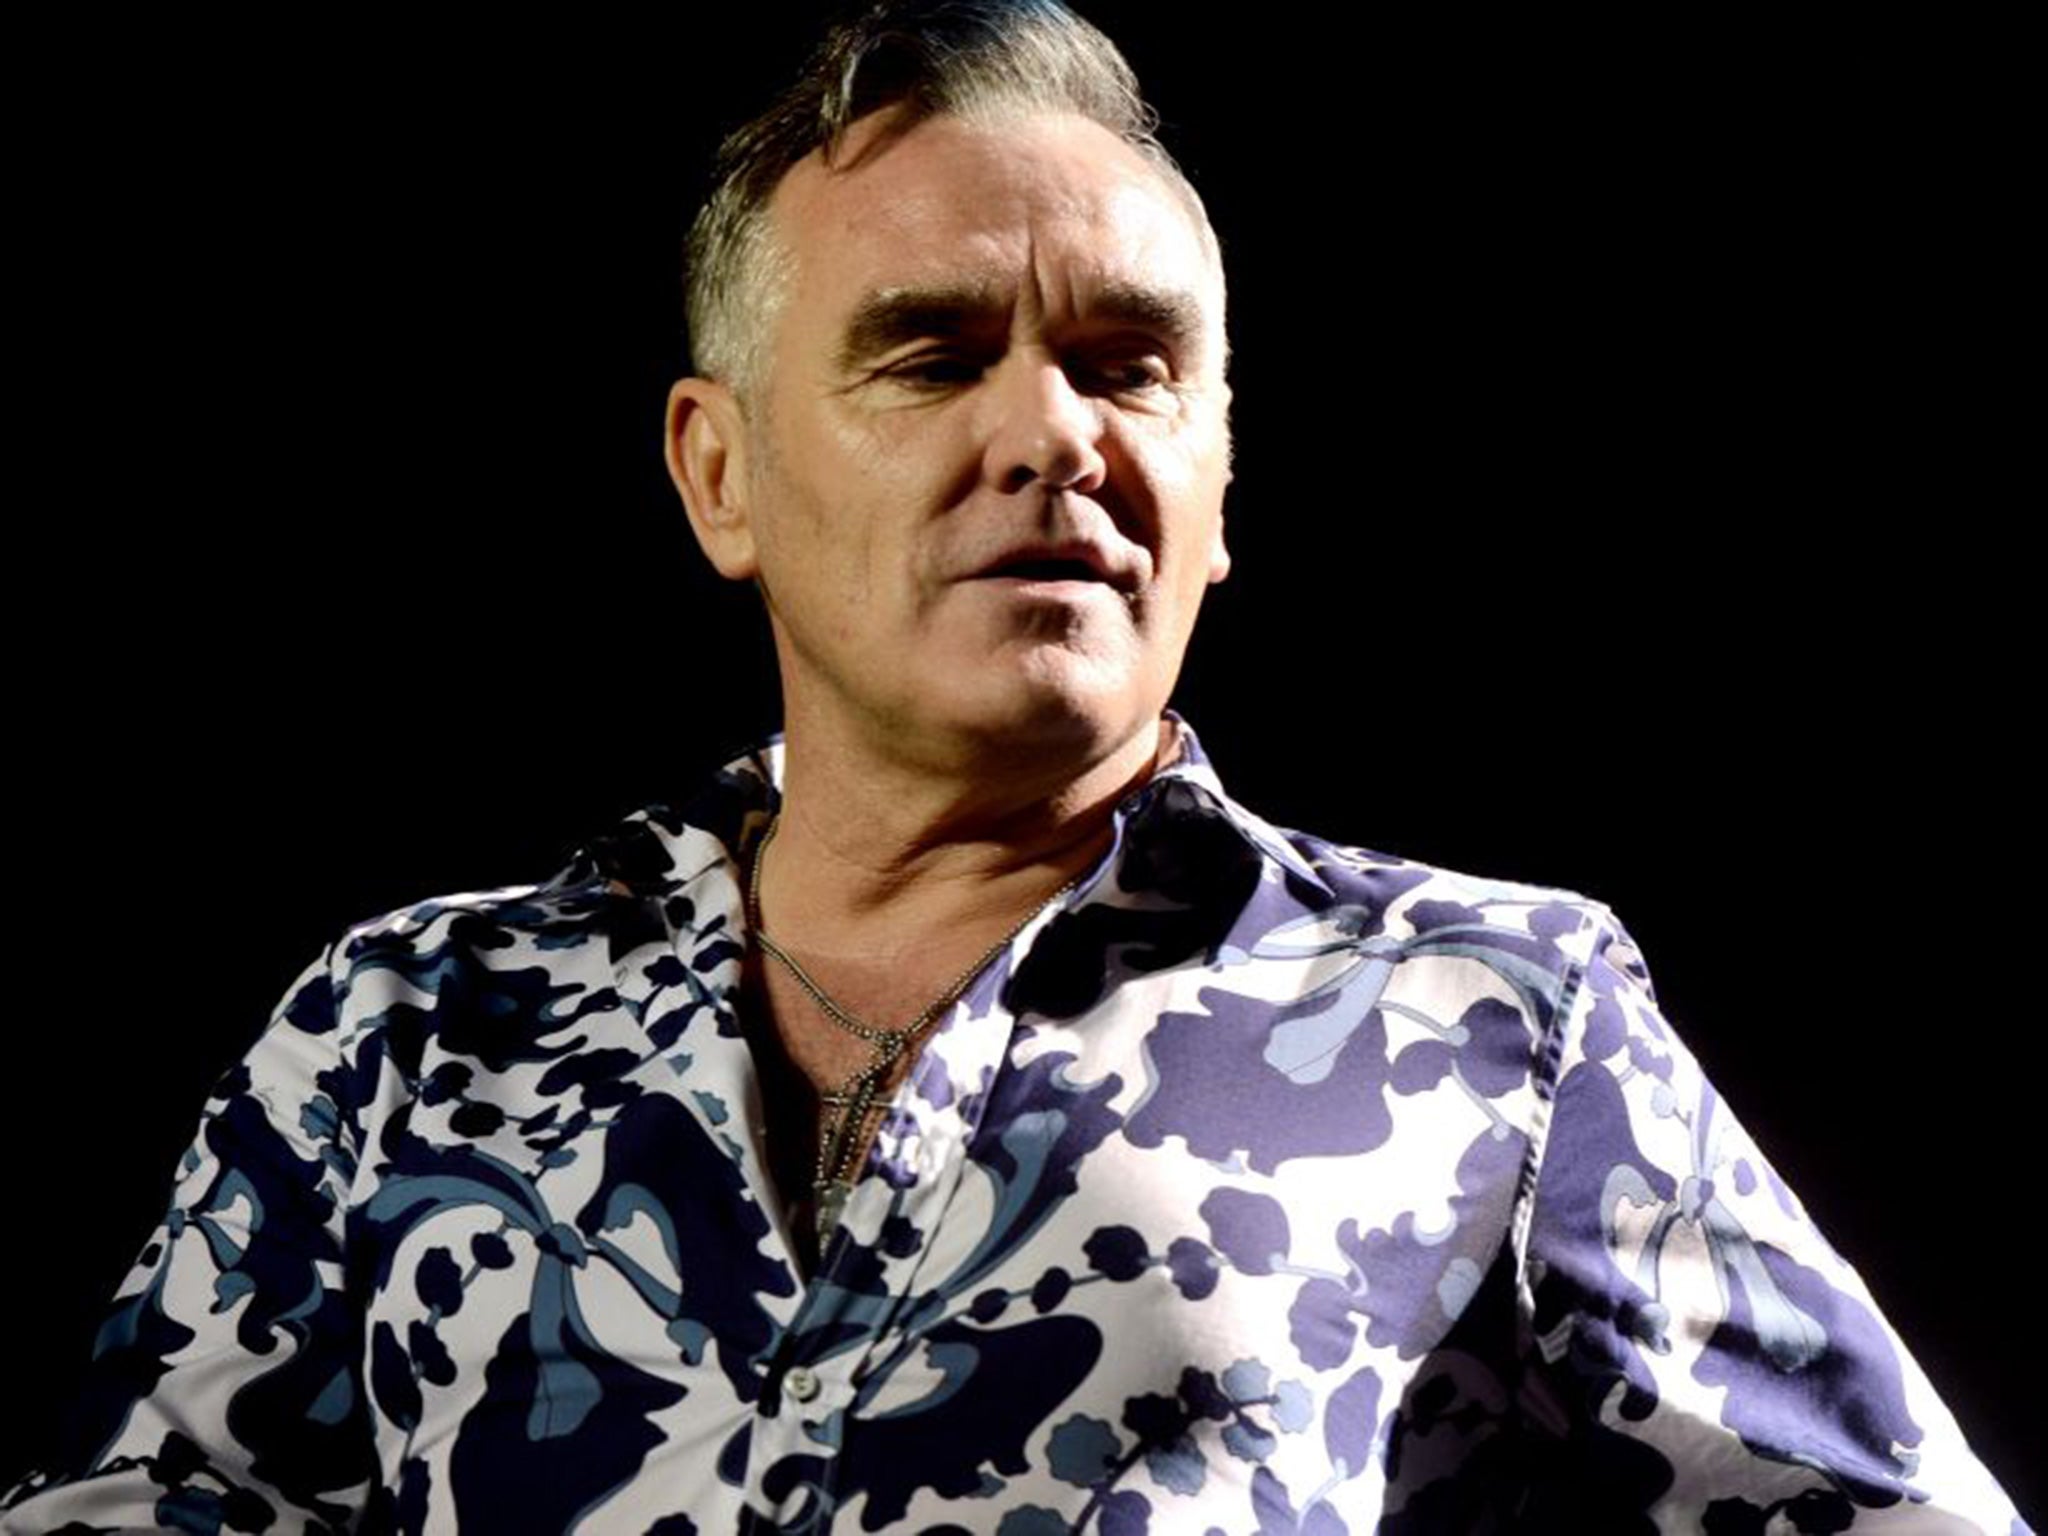 Morrissey issued a statement to the site in which he expressed his views on both animal welfare and the meat industry